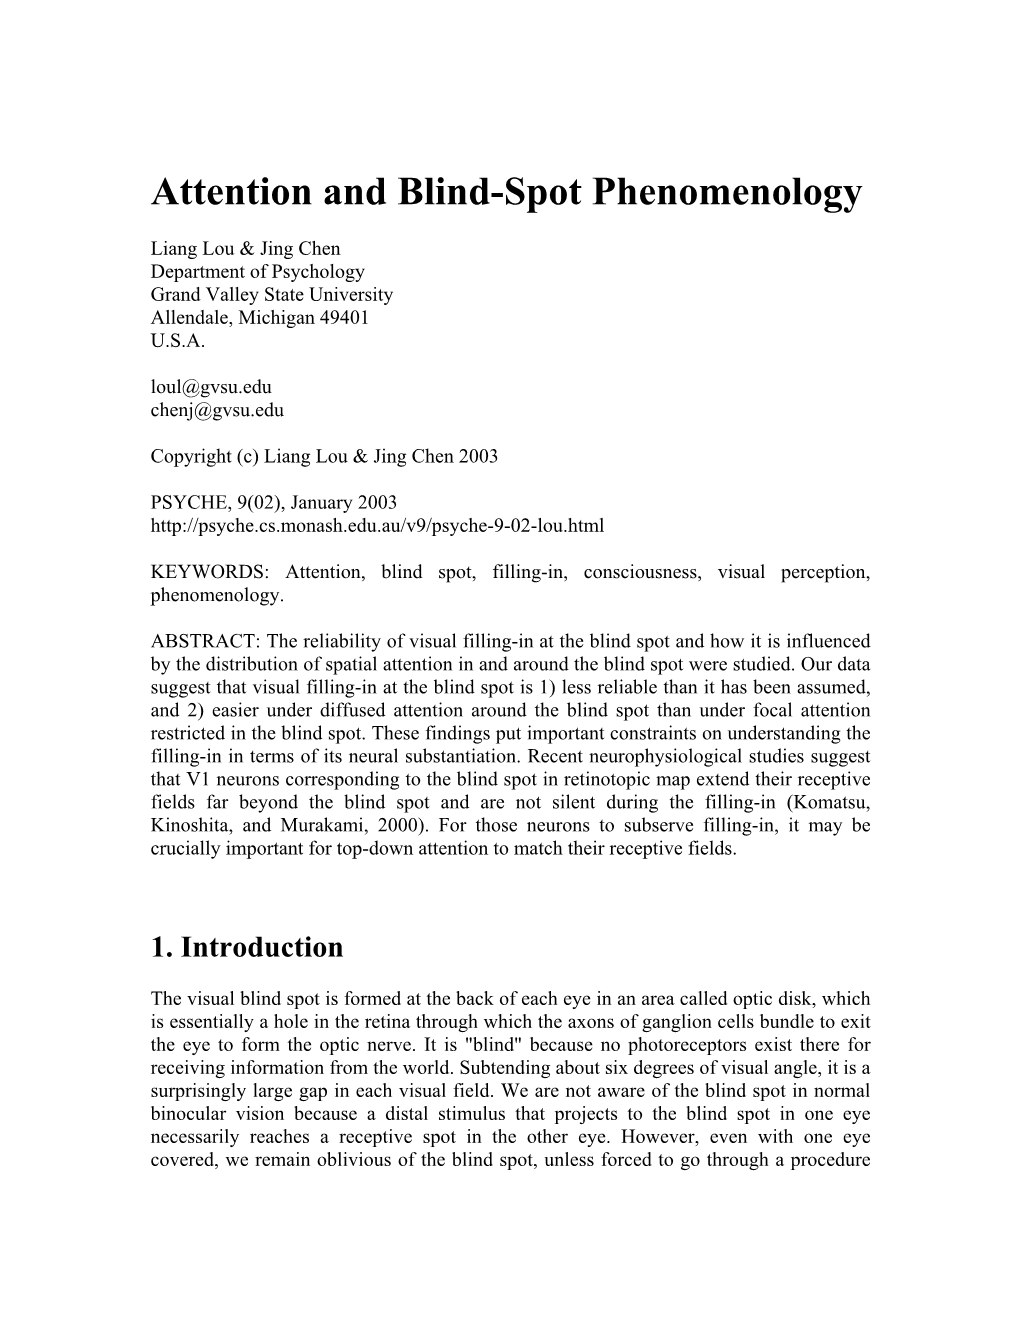 Attention and Blind-Spot Phenomenology